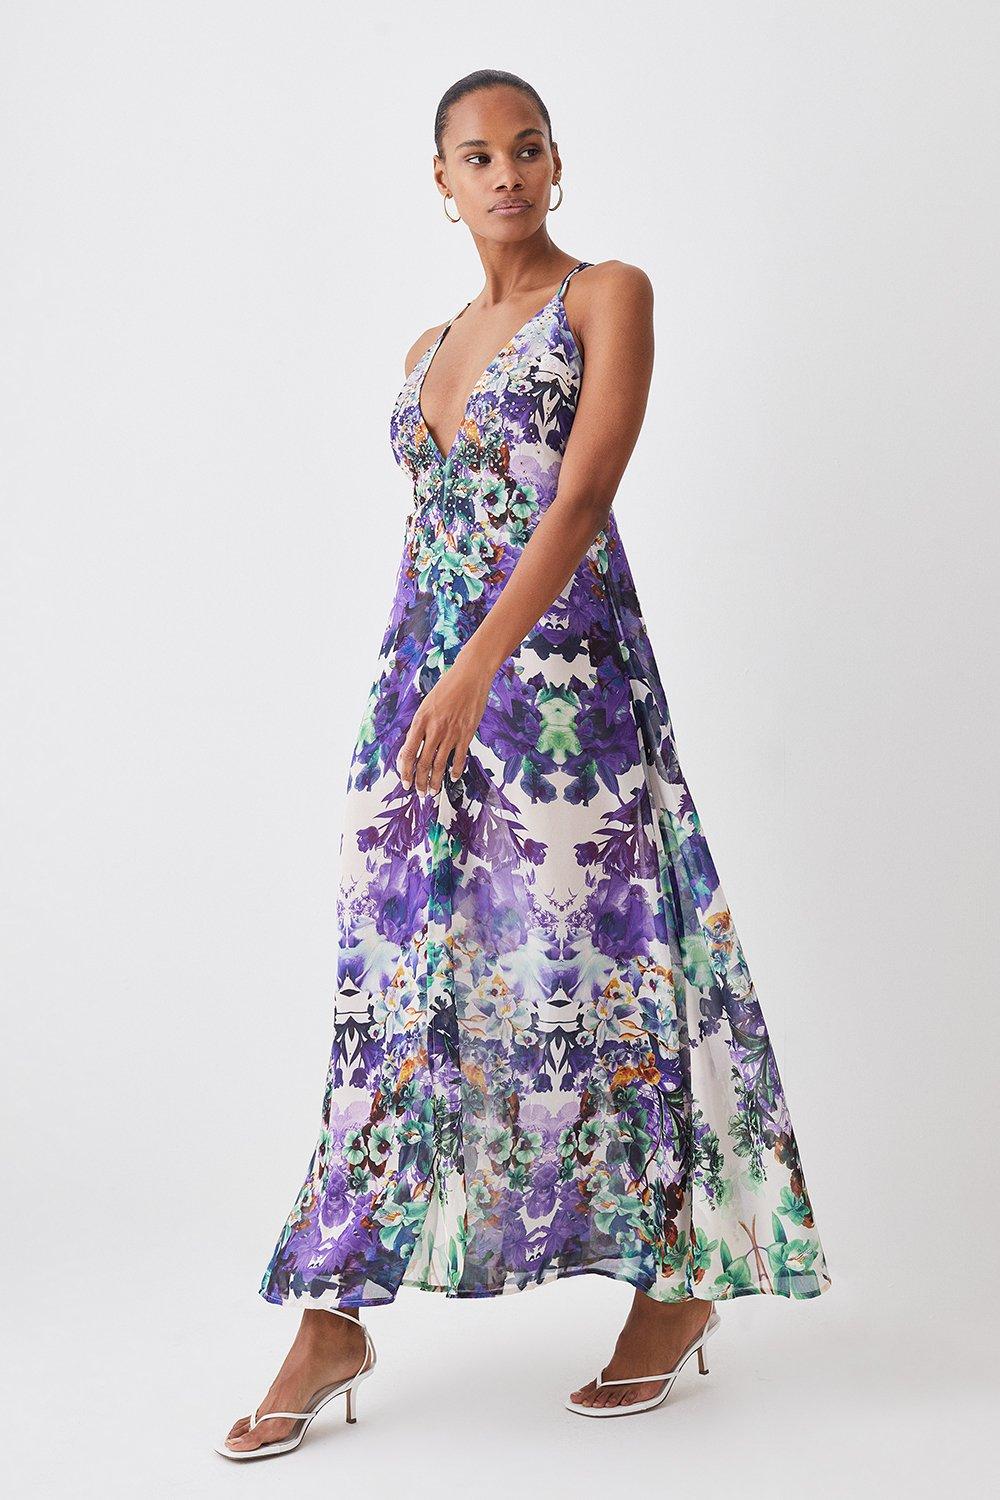 Mirrored Floral Embellished Strappy Beach Maxi Dress